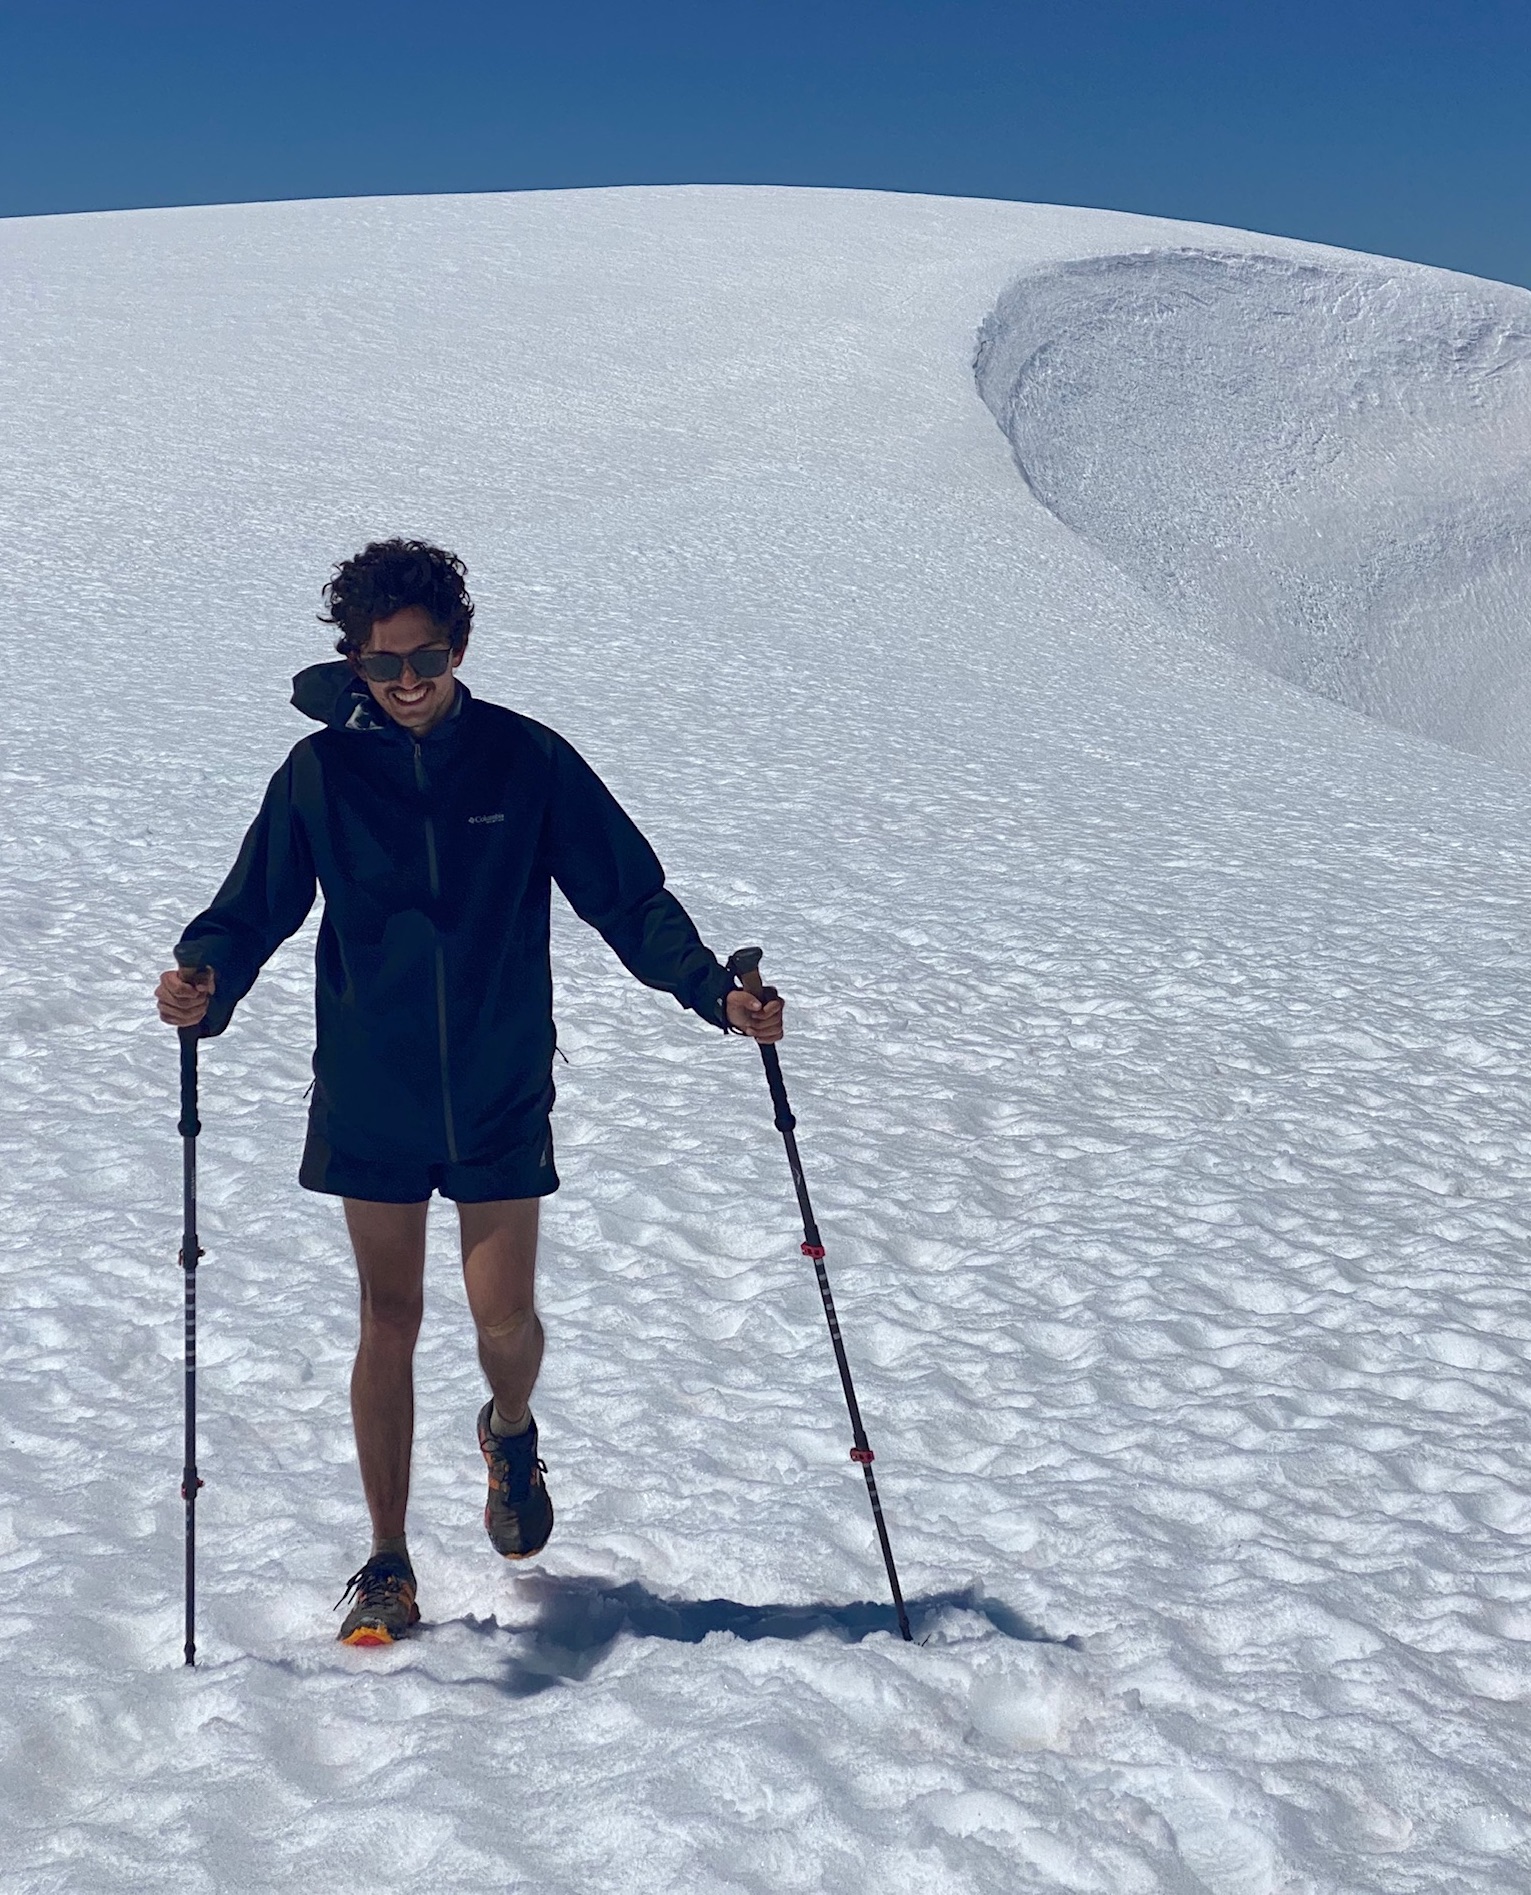 At the summit of South Sister, Oregon